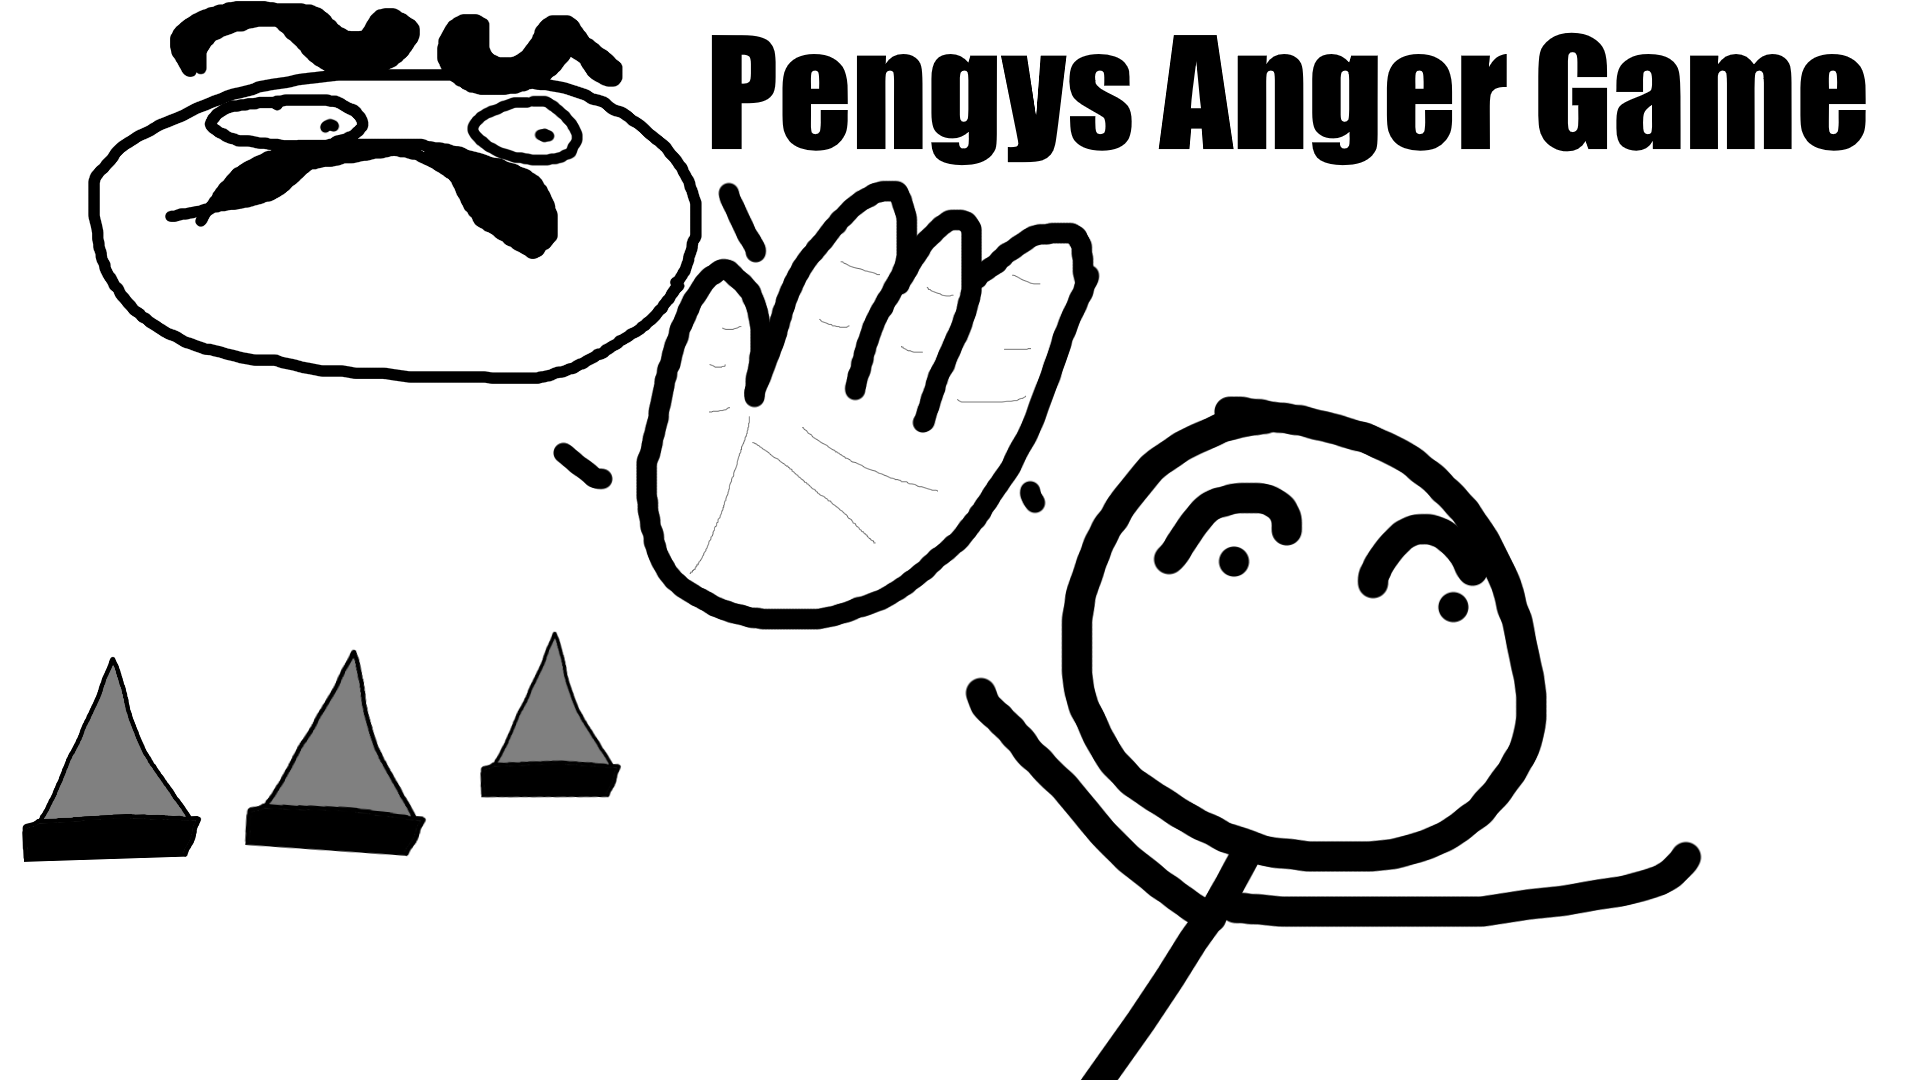 Pengy's Rage Game